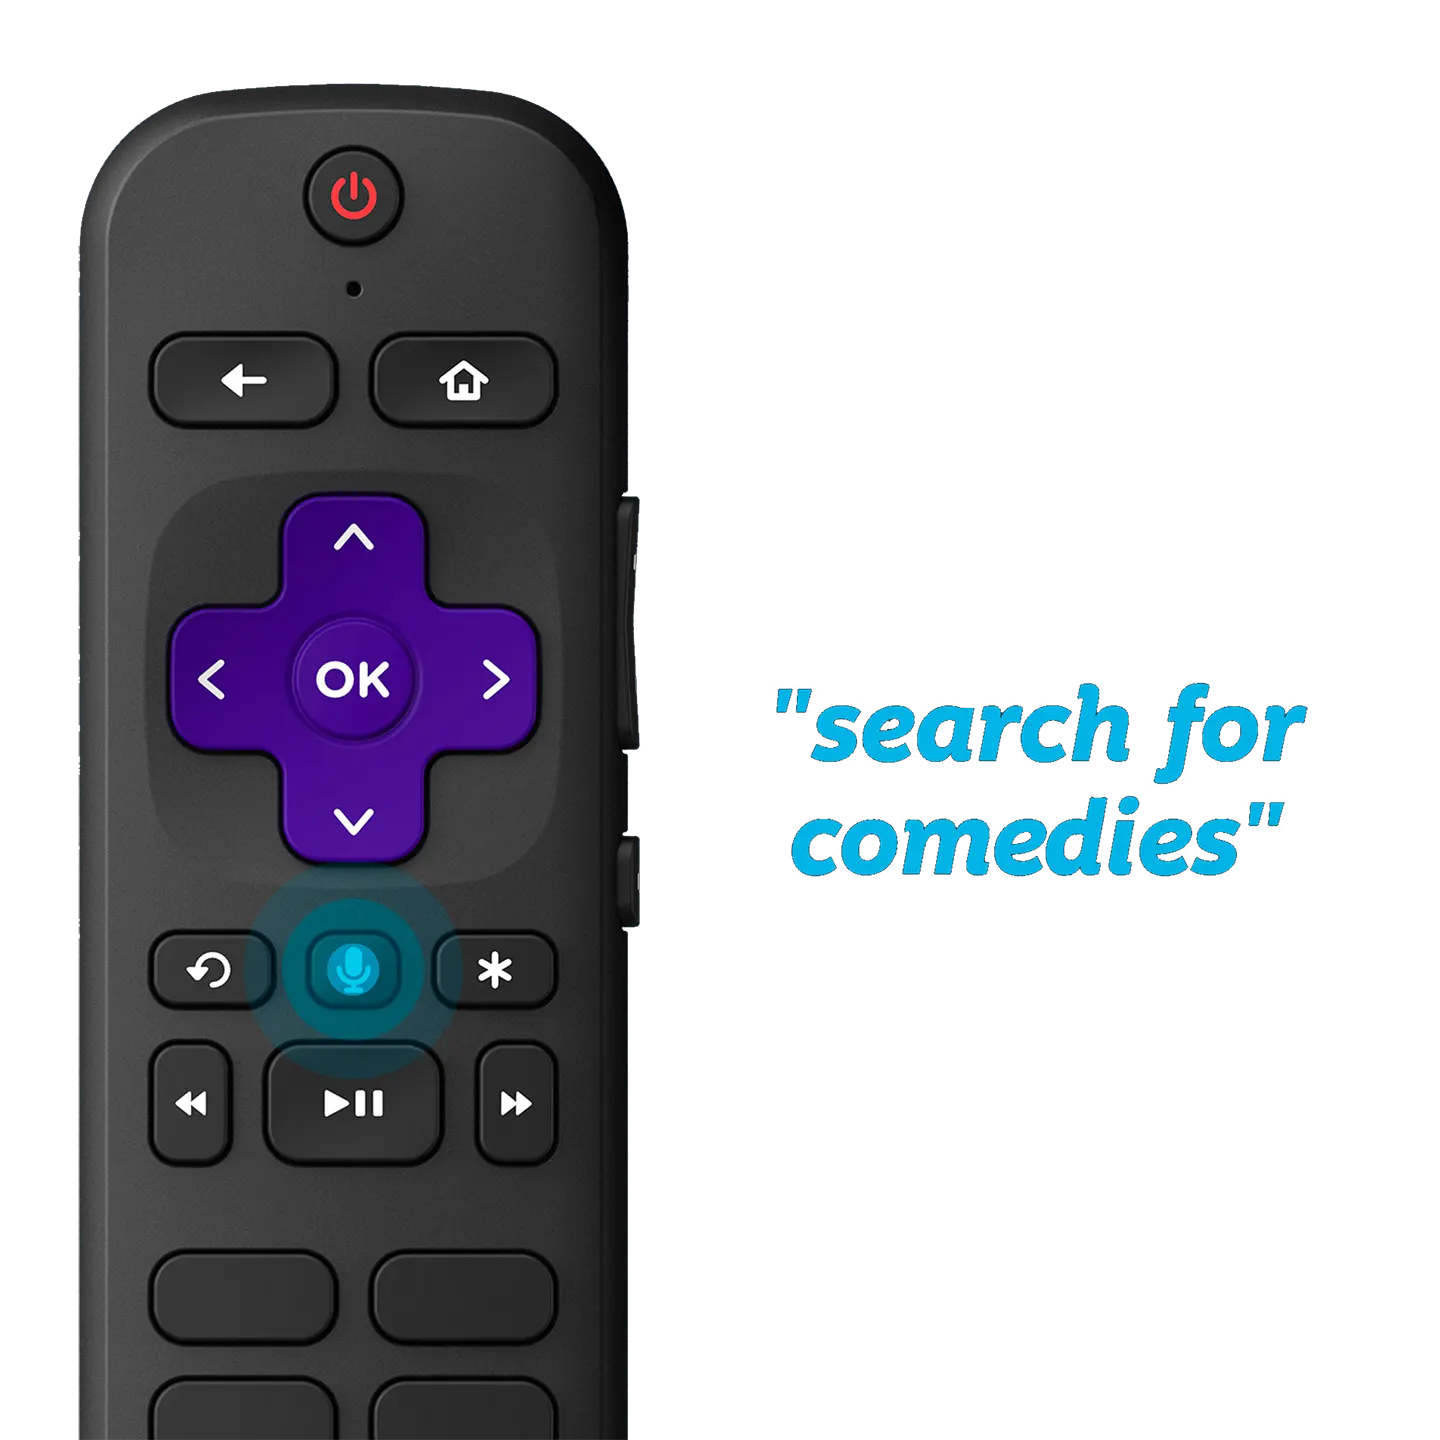 ROKU VOICE REMOTE - "search for comedies"